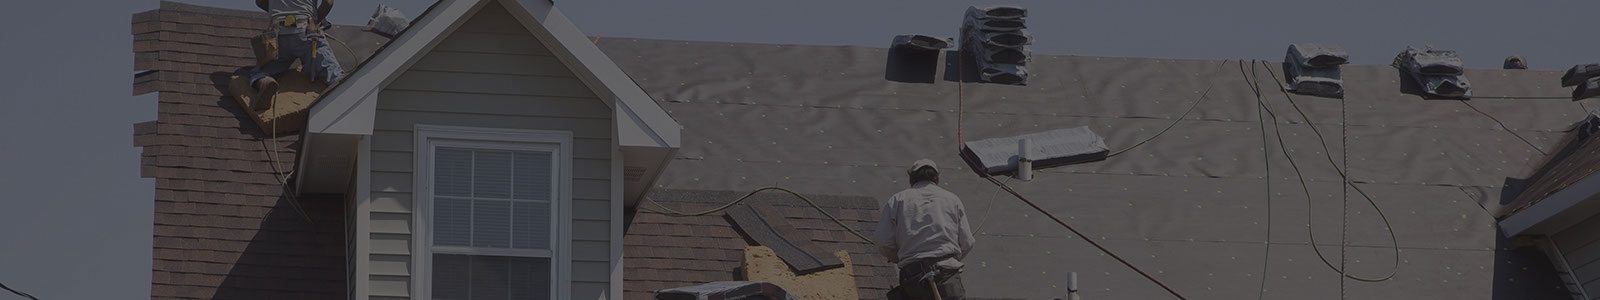 Timberline Roofing Banner Image